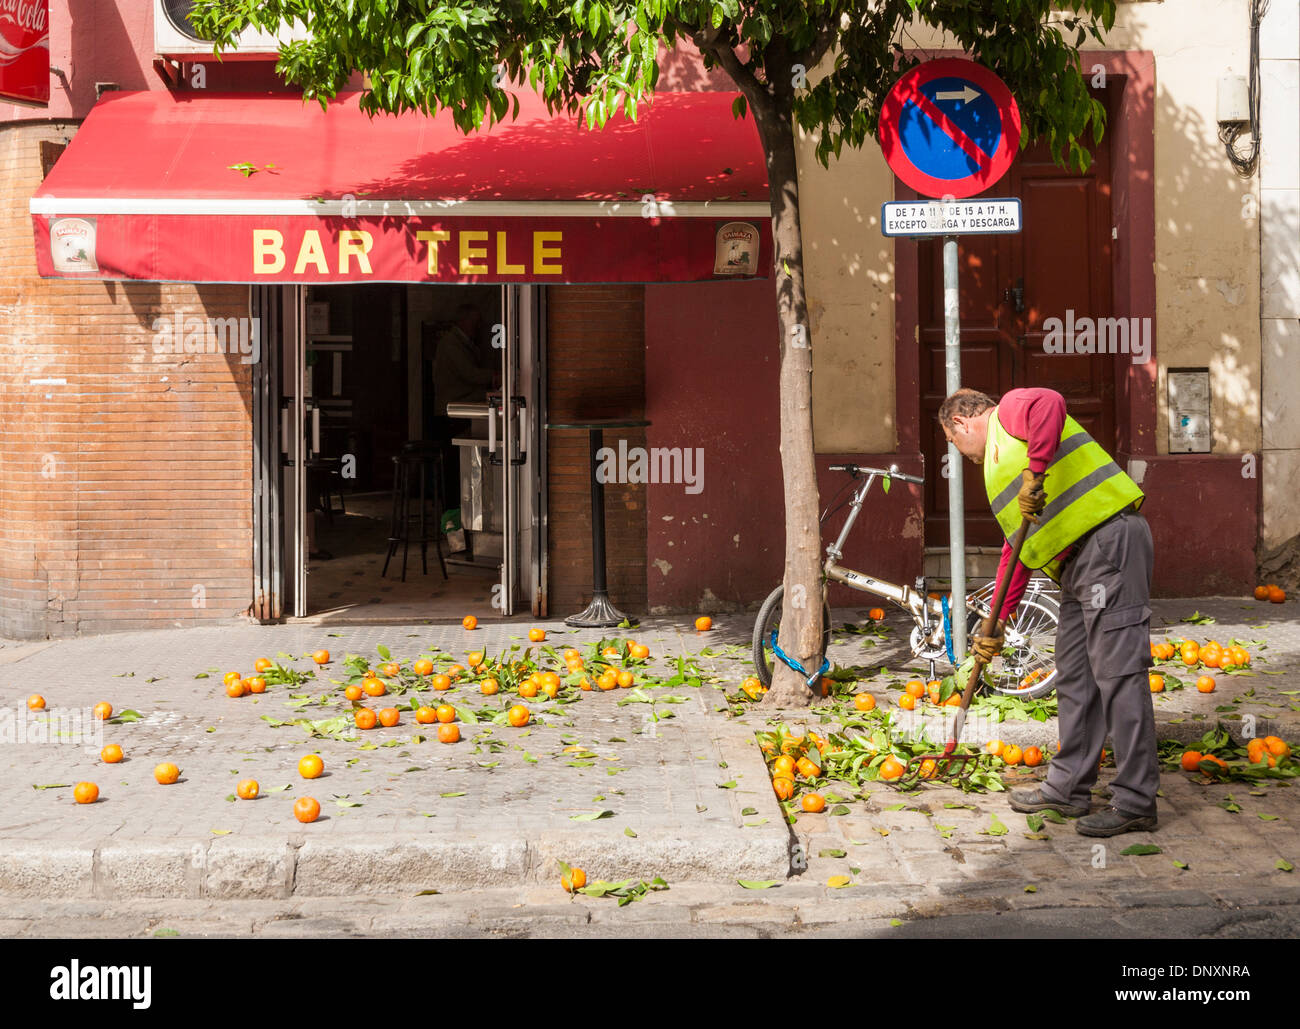 Council worker in Seville, Spain, collecting windfall Oranges from trees in city centre. Stock Photo